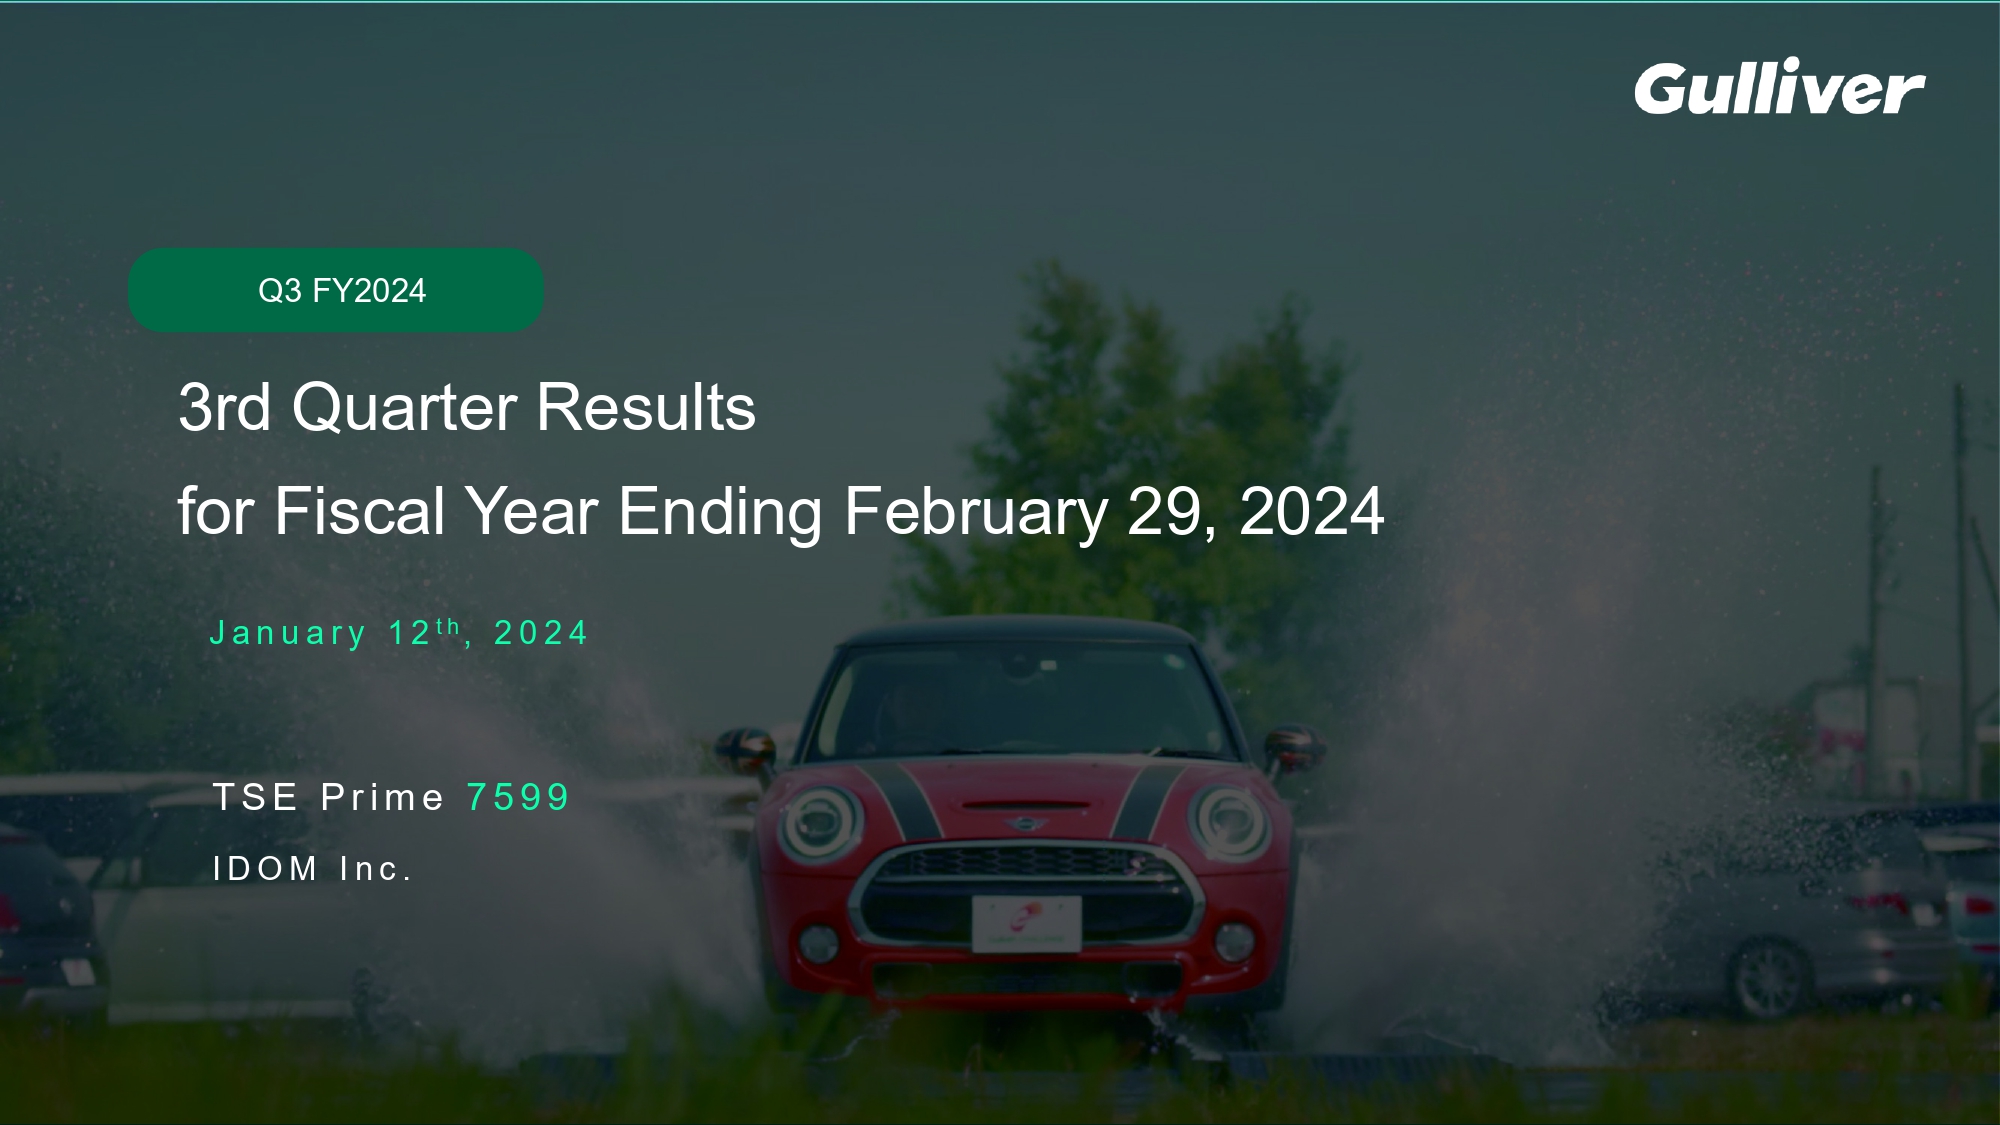 Release of “3rd Quarter Results for Fiscal Year Ending February 29, 2024″